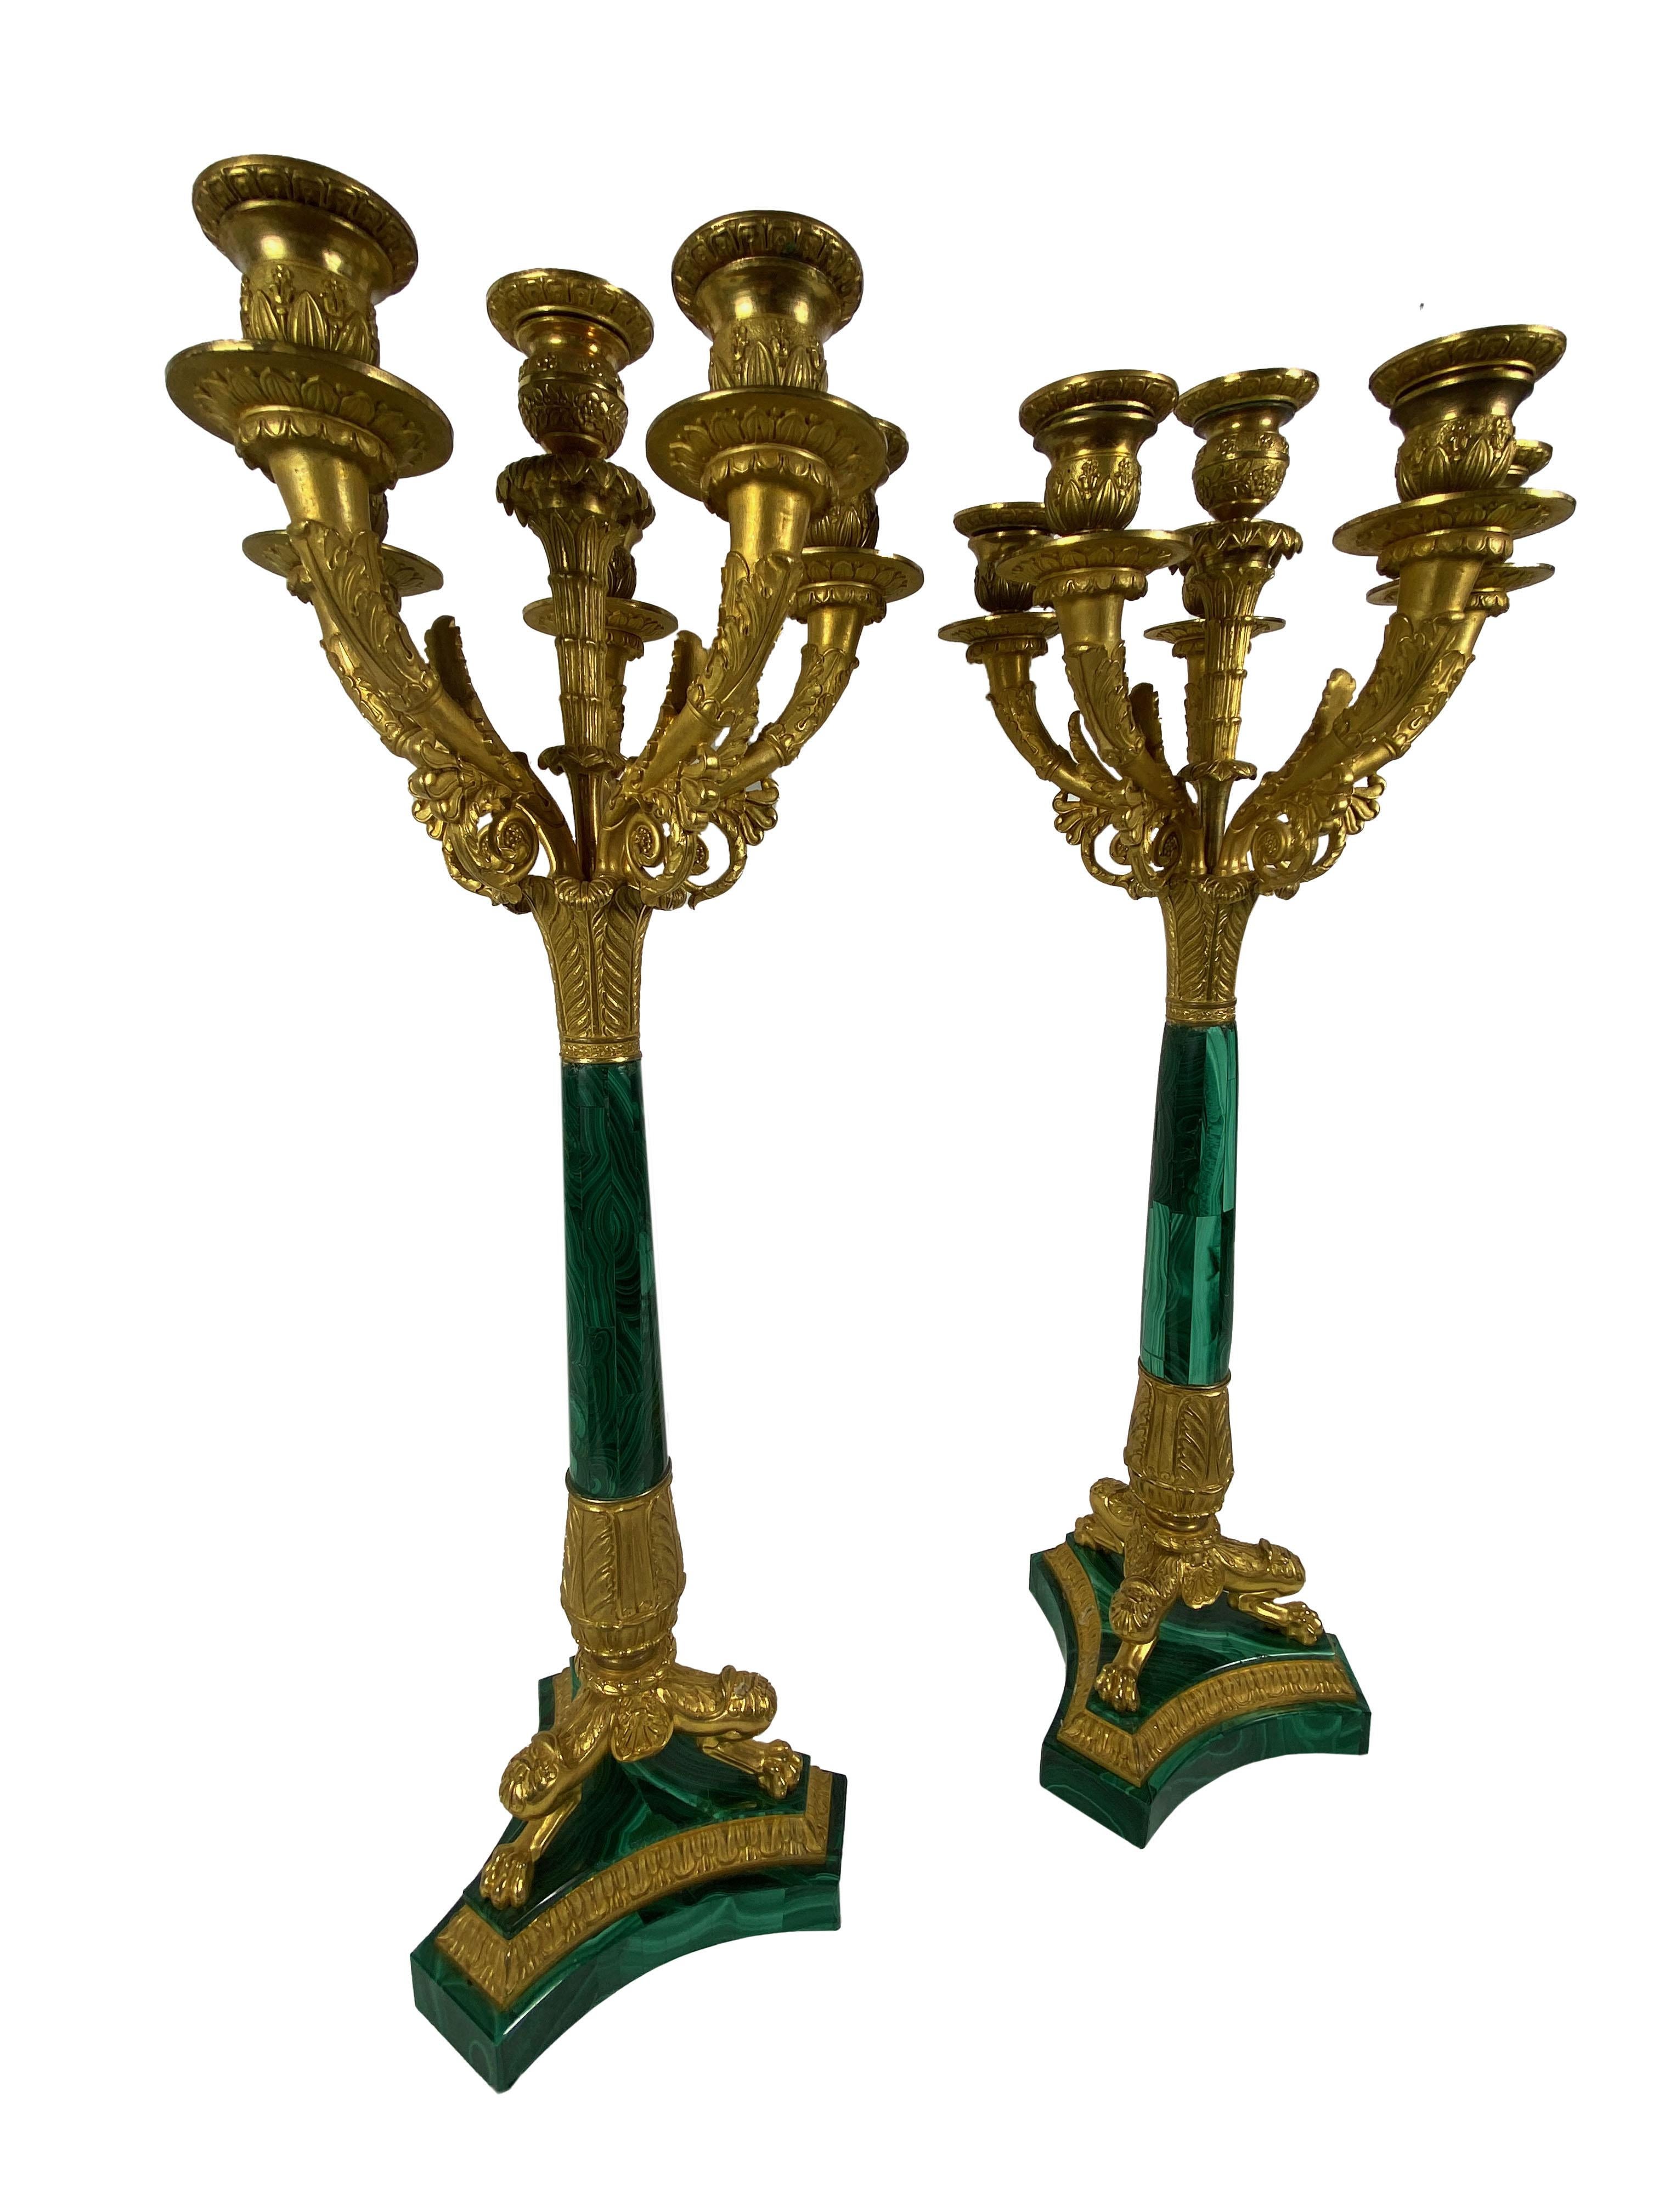 A fine pair of French Empire style bronze dore candelabra with tapering malachite stems resting on three lion paw feet on triform malachite bases. Circa 1870.